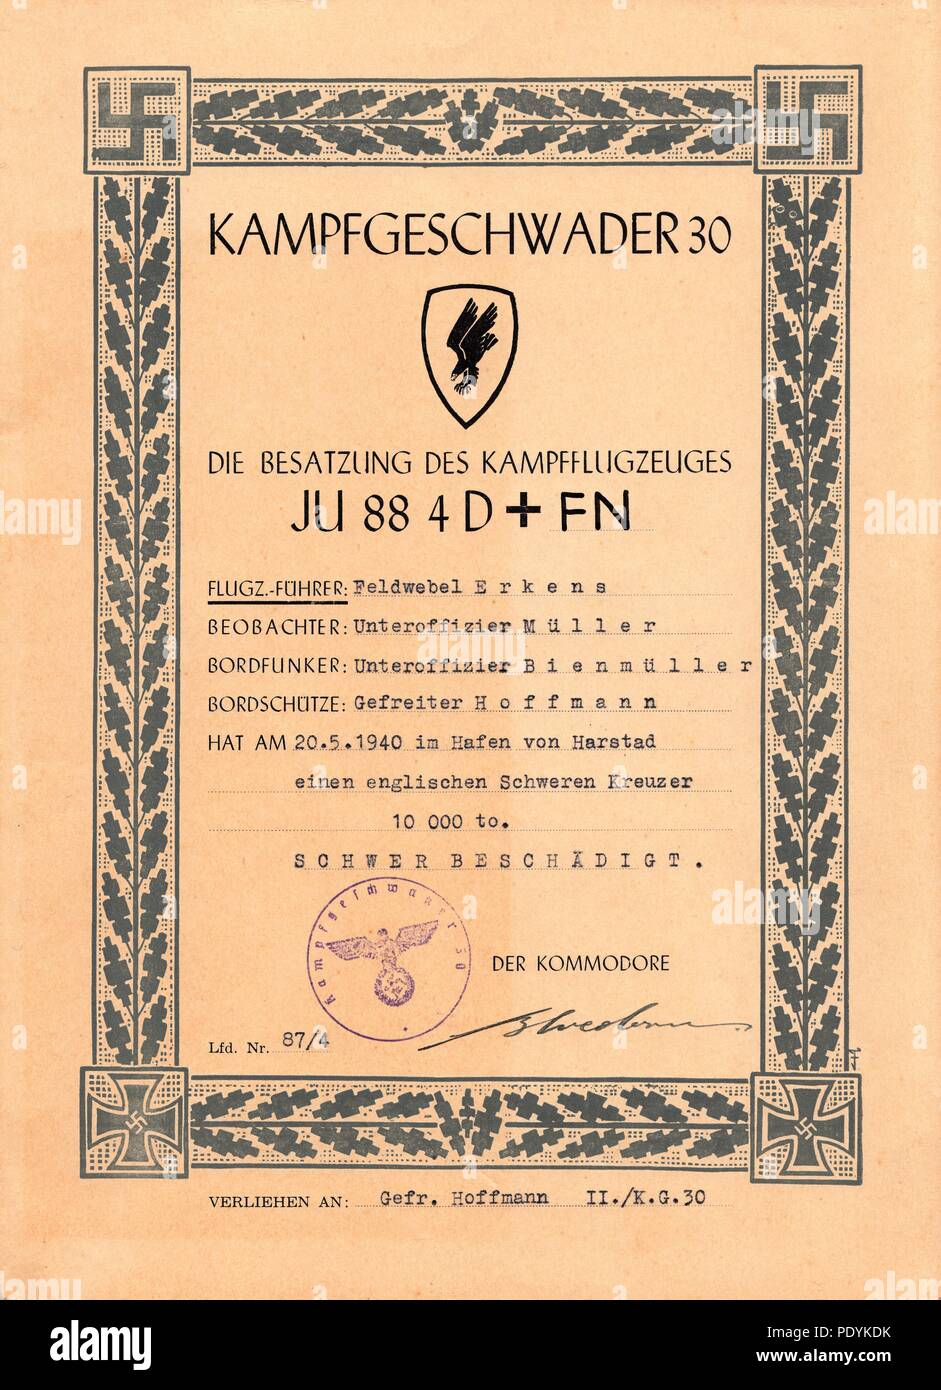 Certificate awarded to Feldwebel Willi Hoffmann of 5. Staffel, Kampfgeschwader 30: Awarded by KG 30 to Feldwebel Willi Erkens (Pilot), Unteroffizier Richard Müller (Observer), Unteroffizier Otto Bienmüller (Radio Operator) and Gefreiter Willi Hoffmann (Air Gunner) of 5./KG 30 for severely damaging an English heavy cruiser in Harstad Harbour on 20th May 1940, while crewing Junkers Ju 88 4D+FN. The document is signed in ink by Major Erich Bloedorn, Kommodore of Kampfgeschwader 30. Stock Photo